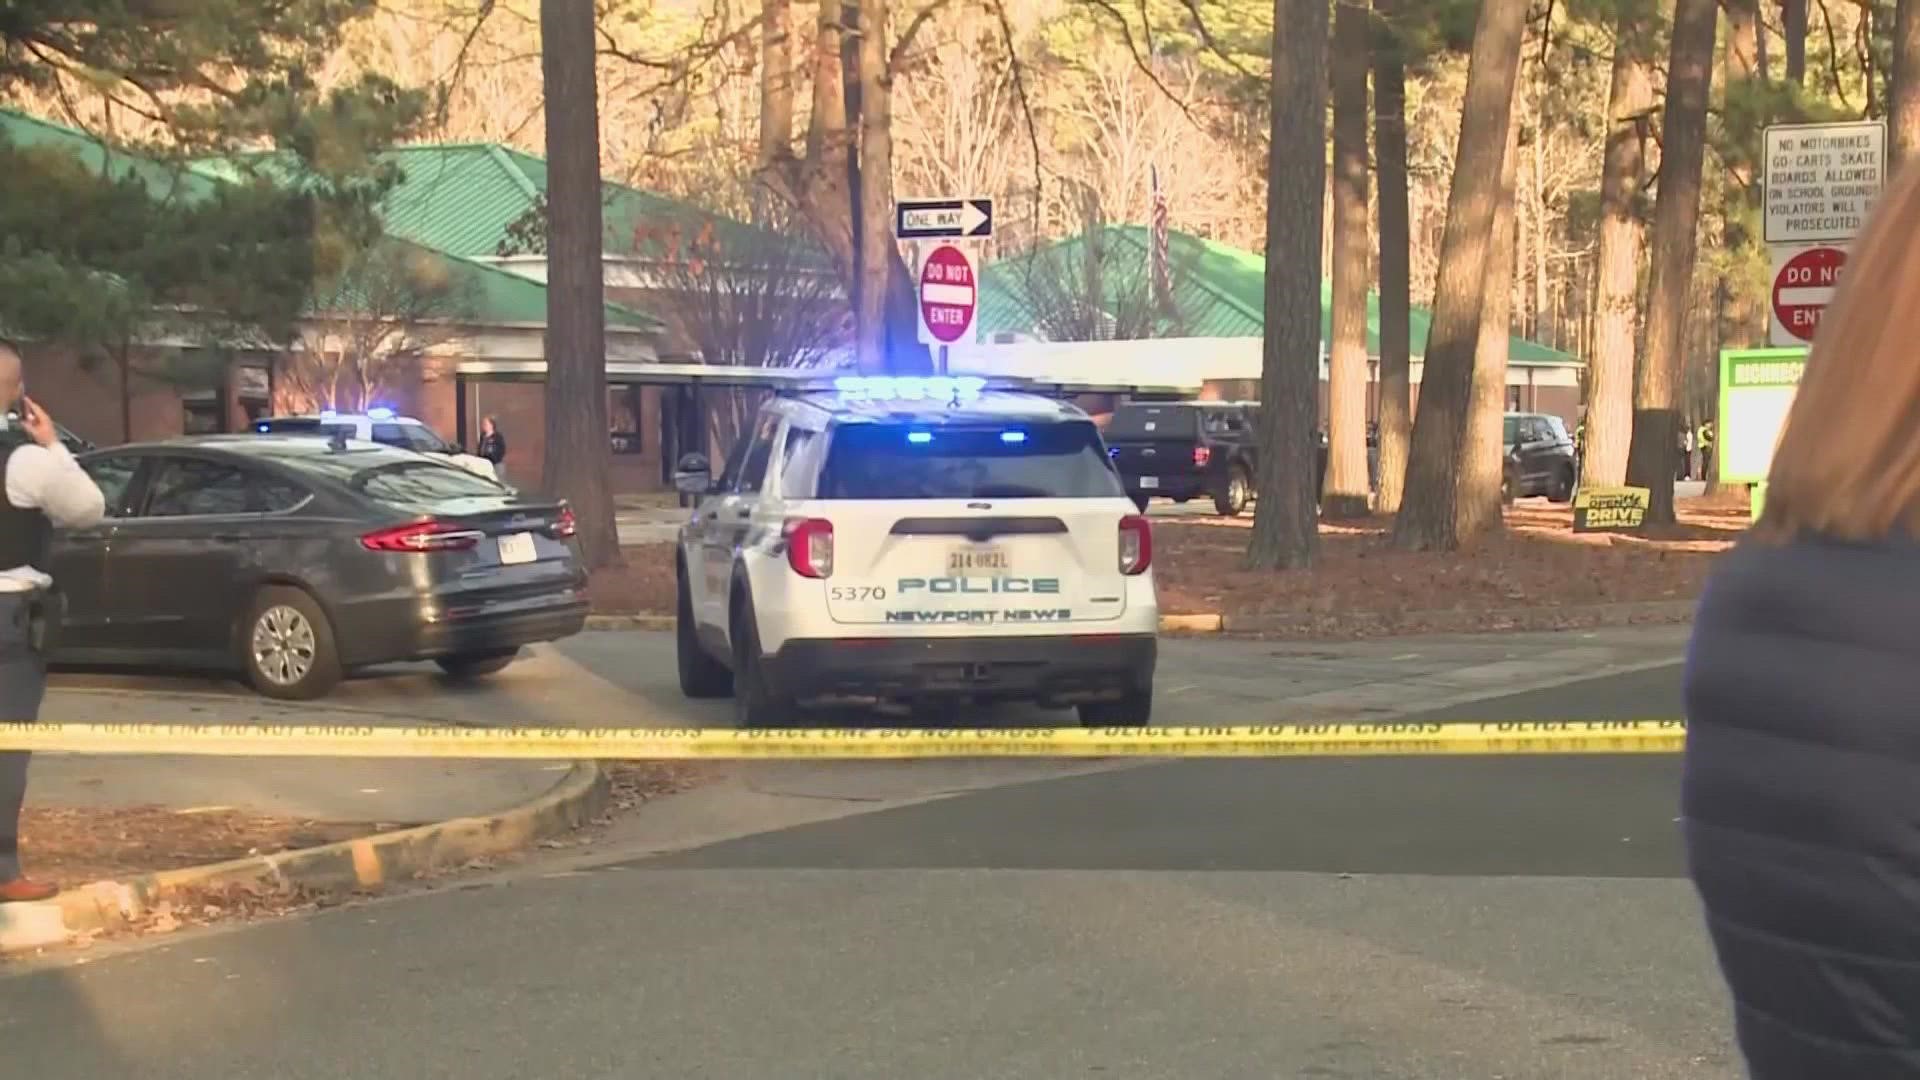 The Newport News Police Chief on Monday offered the first description of how the shooting happened involving a 6-year-old student.